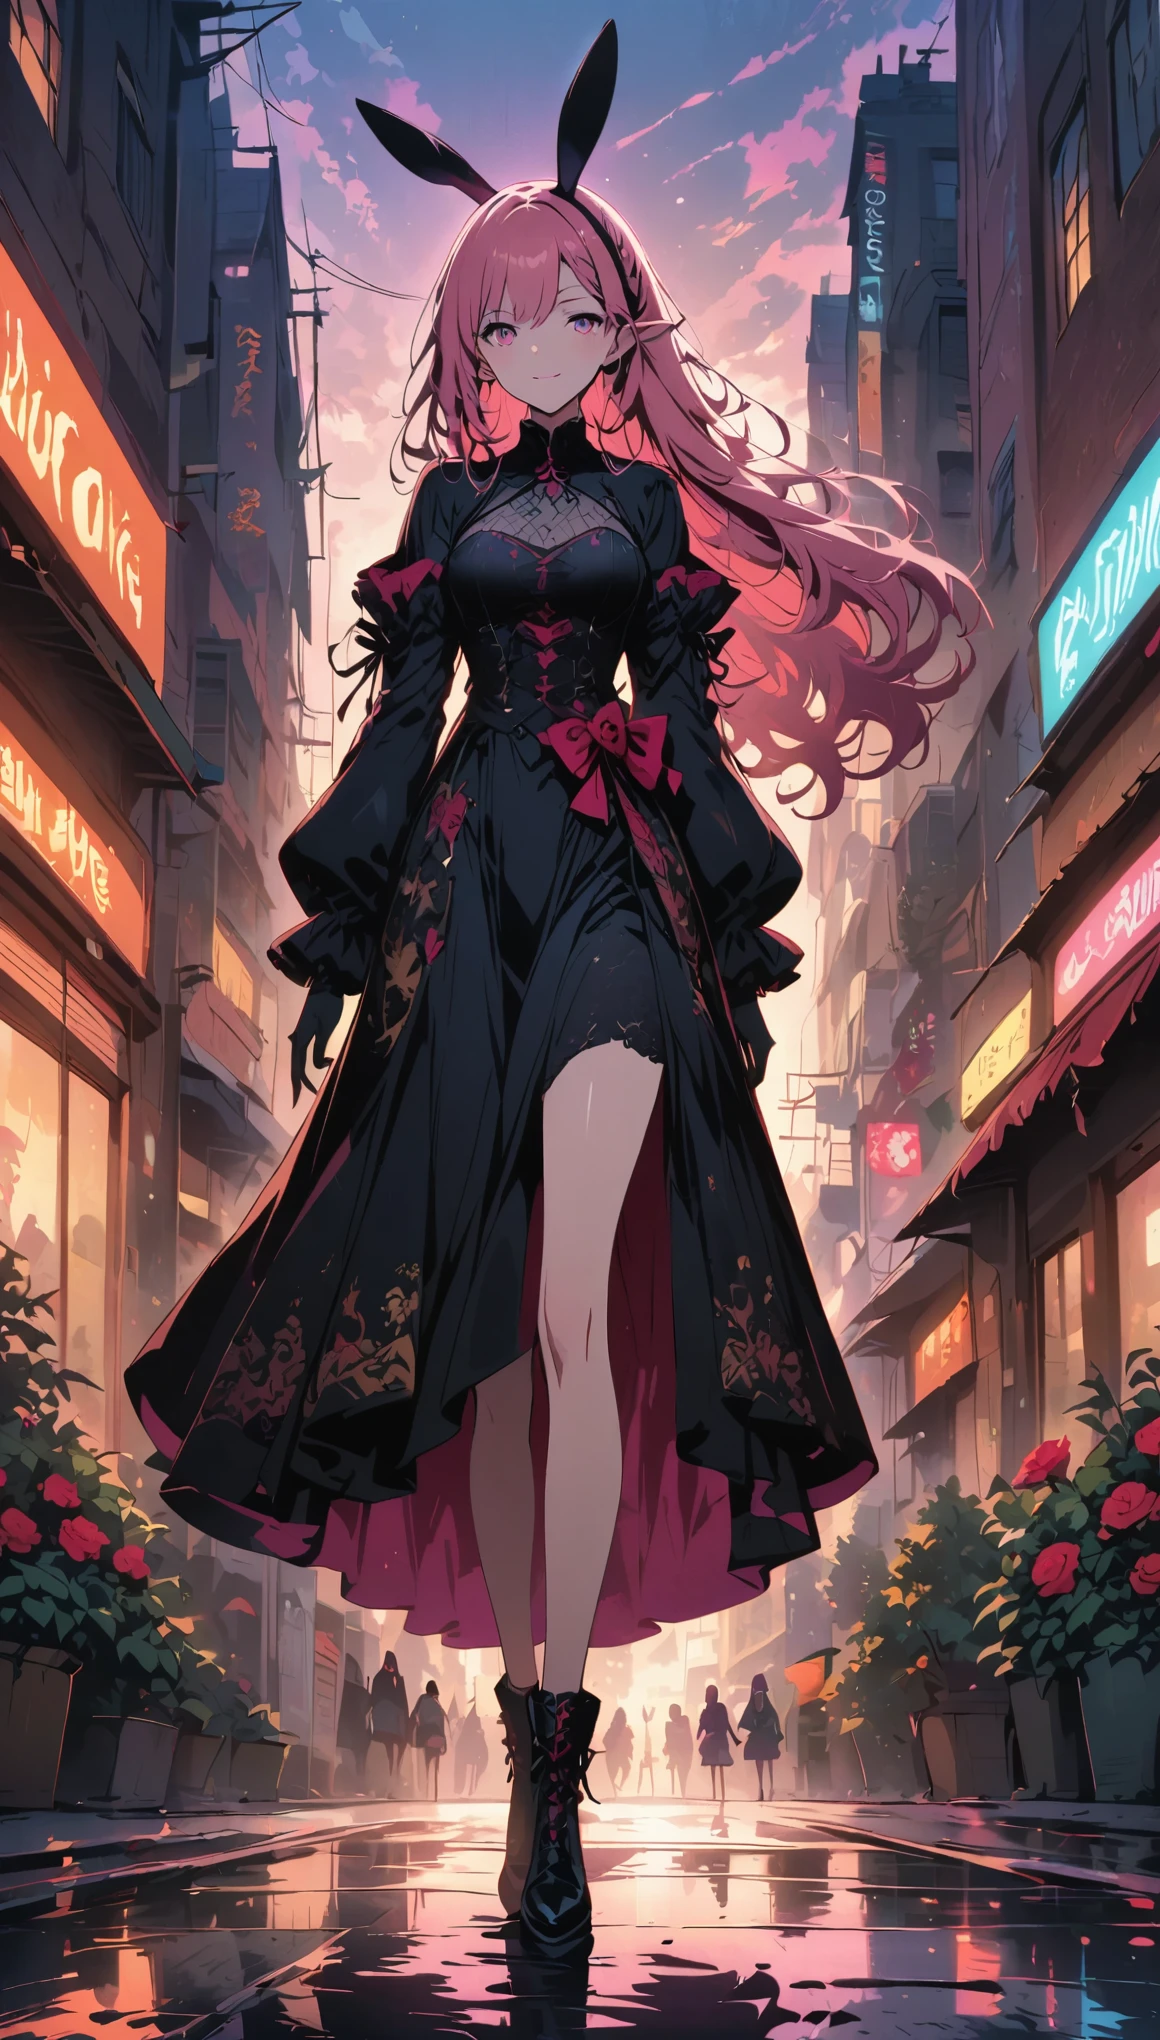 anime style, a woman with ears and a rabbit tail, With a rabbit tail, With rabbit ears, girls design, Second-rate,standing on the street, gisha, anime image, long hair, pink hair, hair covering ears, happy, Polished and powerful look, out of tune, High  